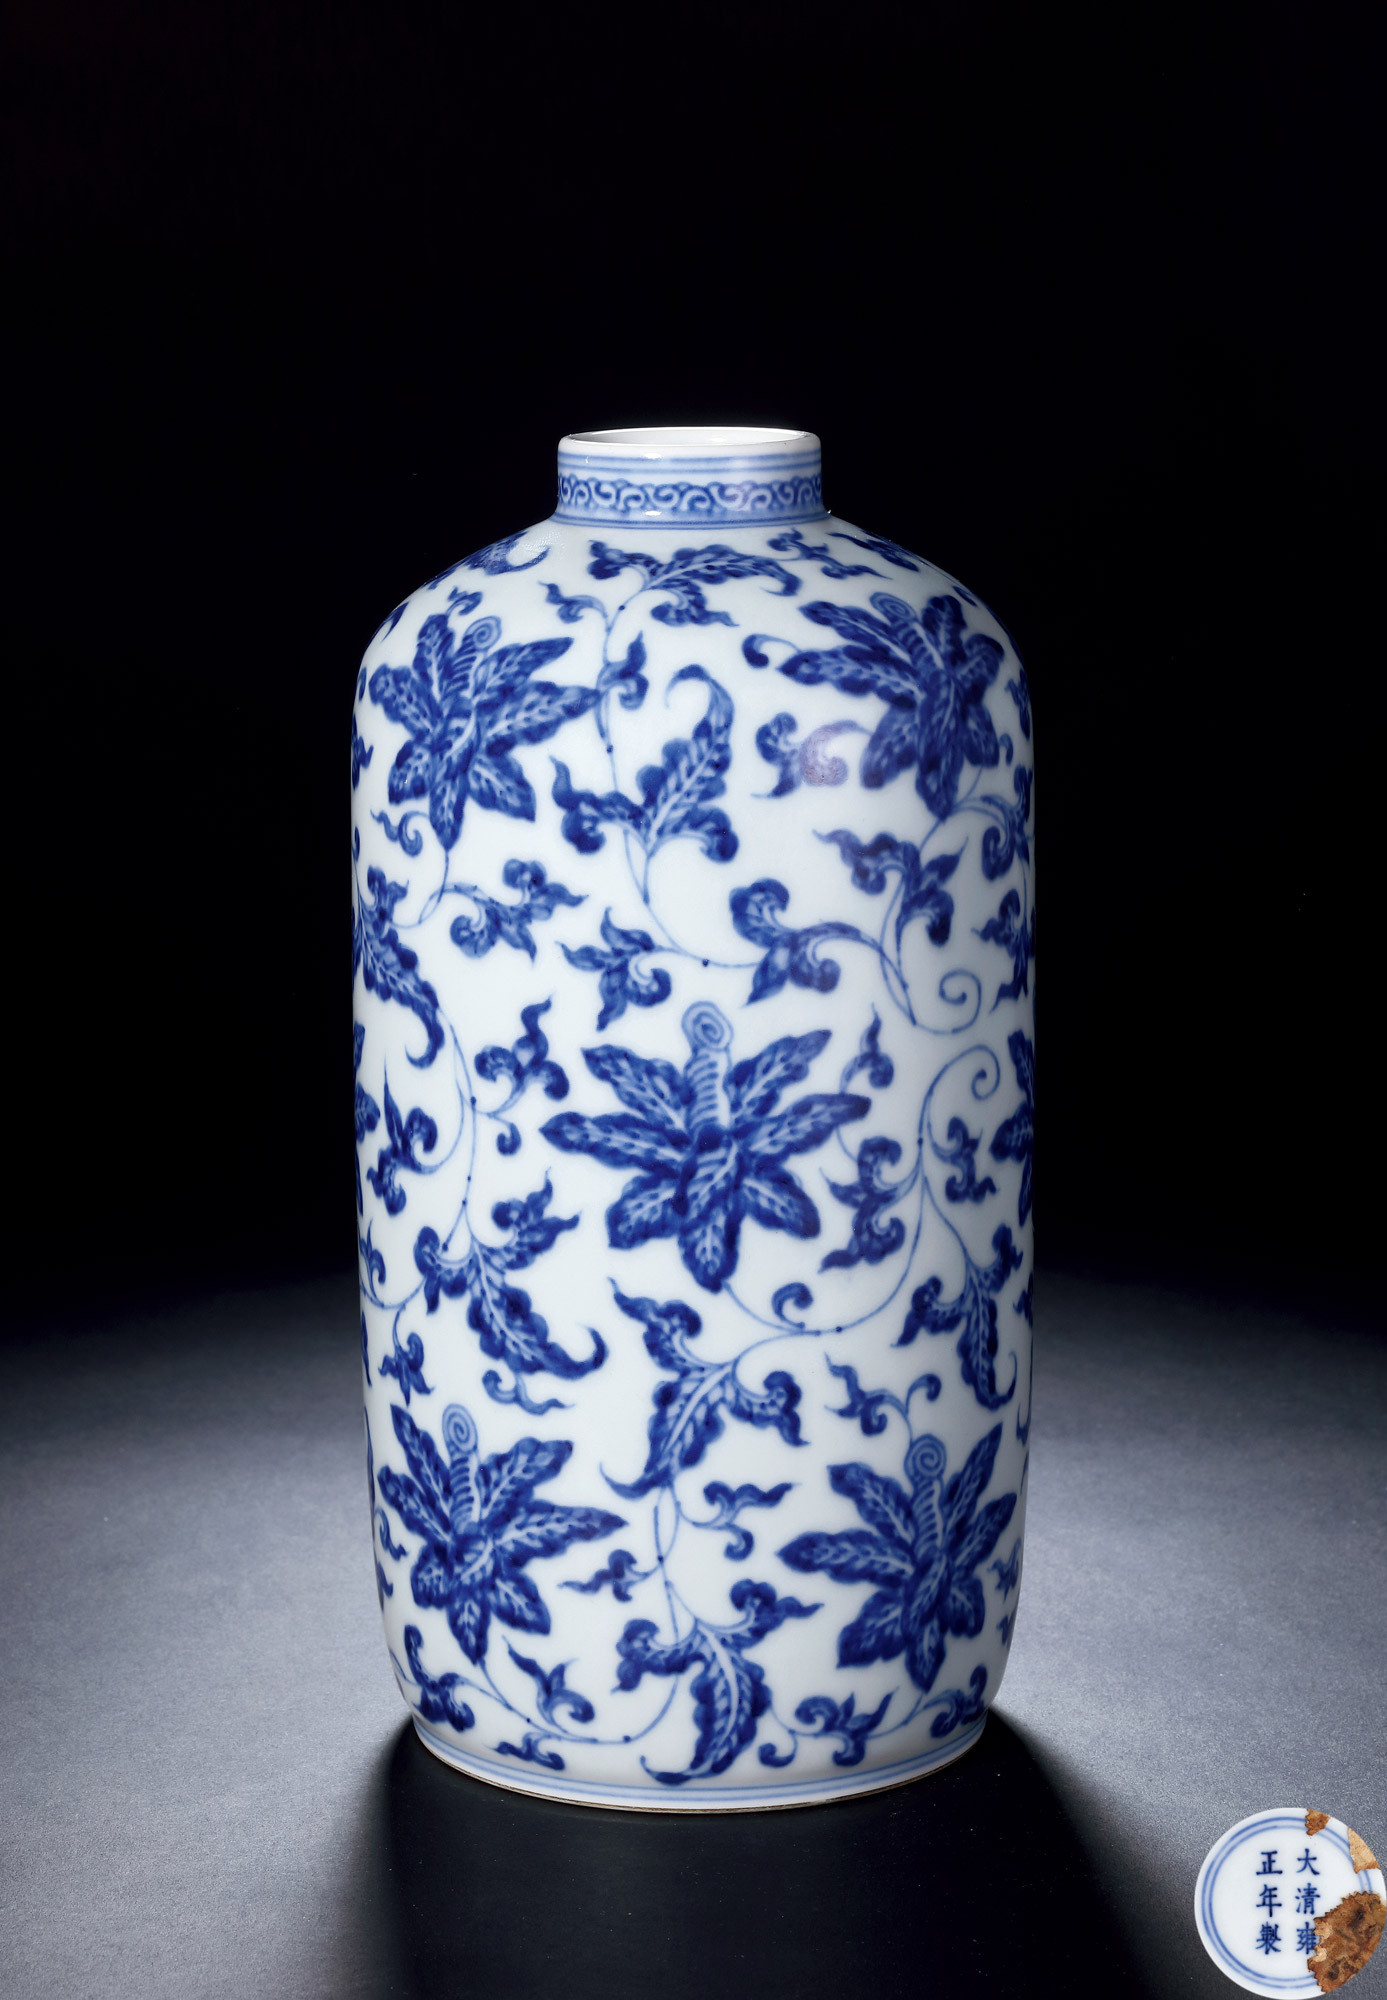 A BLUE-AND-WHITE LANTERN-SHAPED VASE WITH‘TULIP’ DESIGN